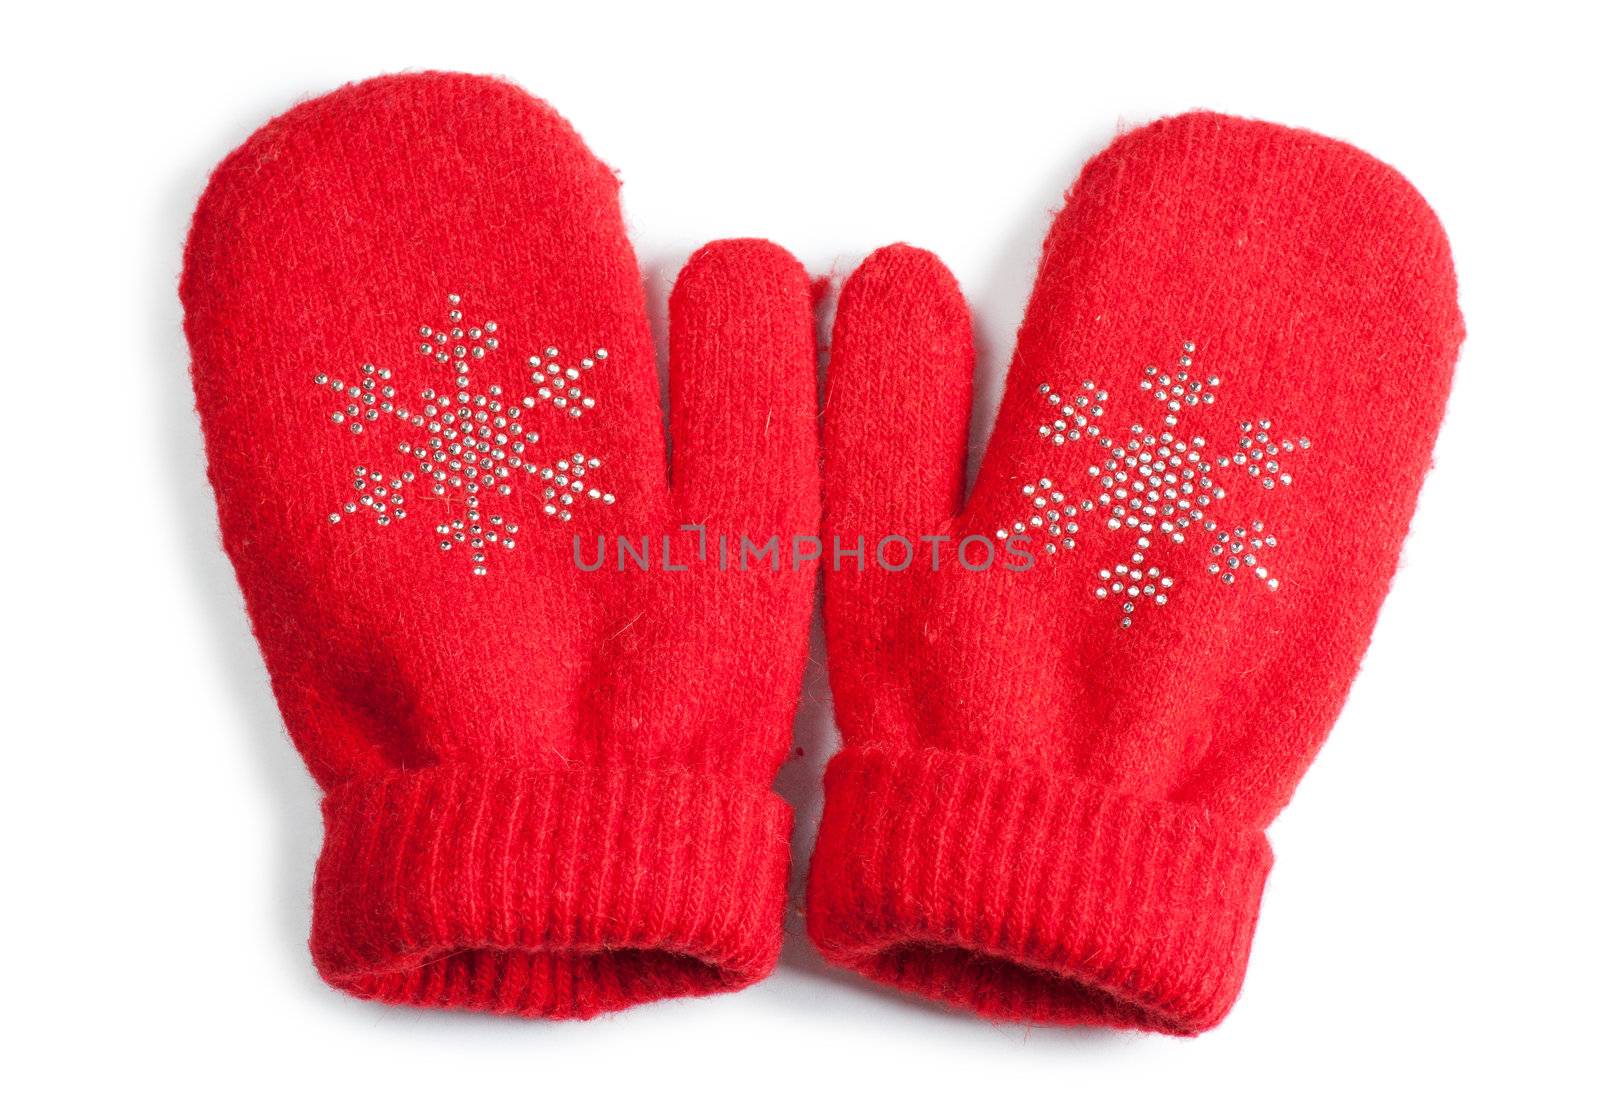 Red little baby mittens/gloves isolated on white background